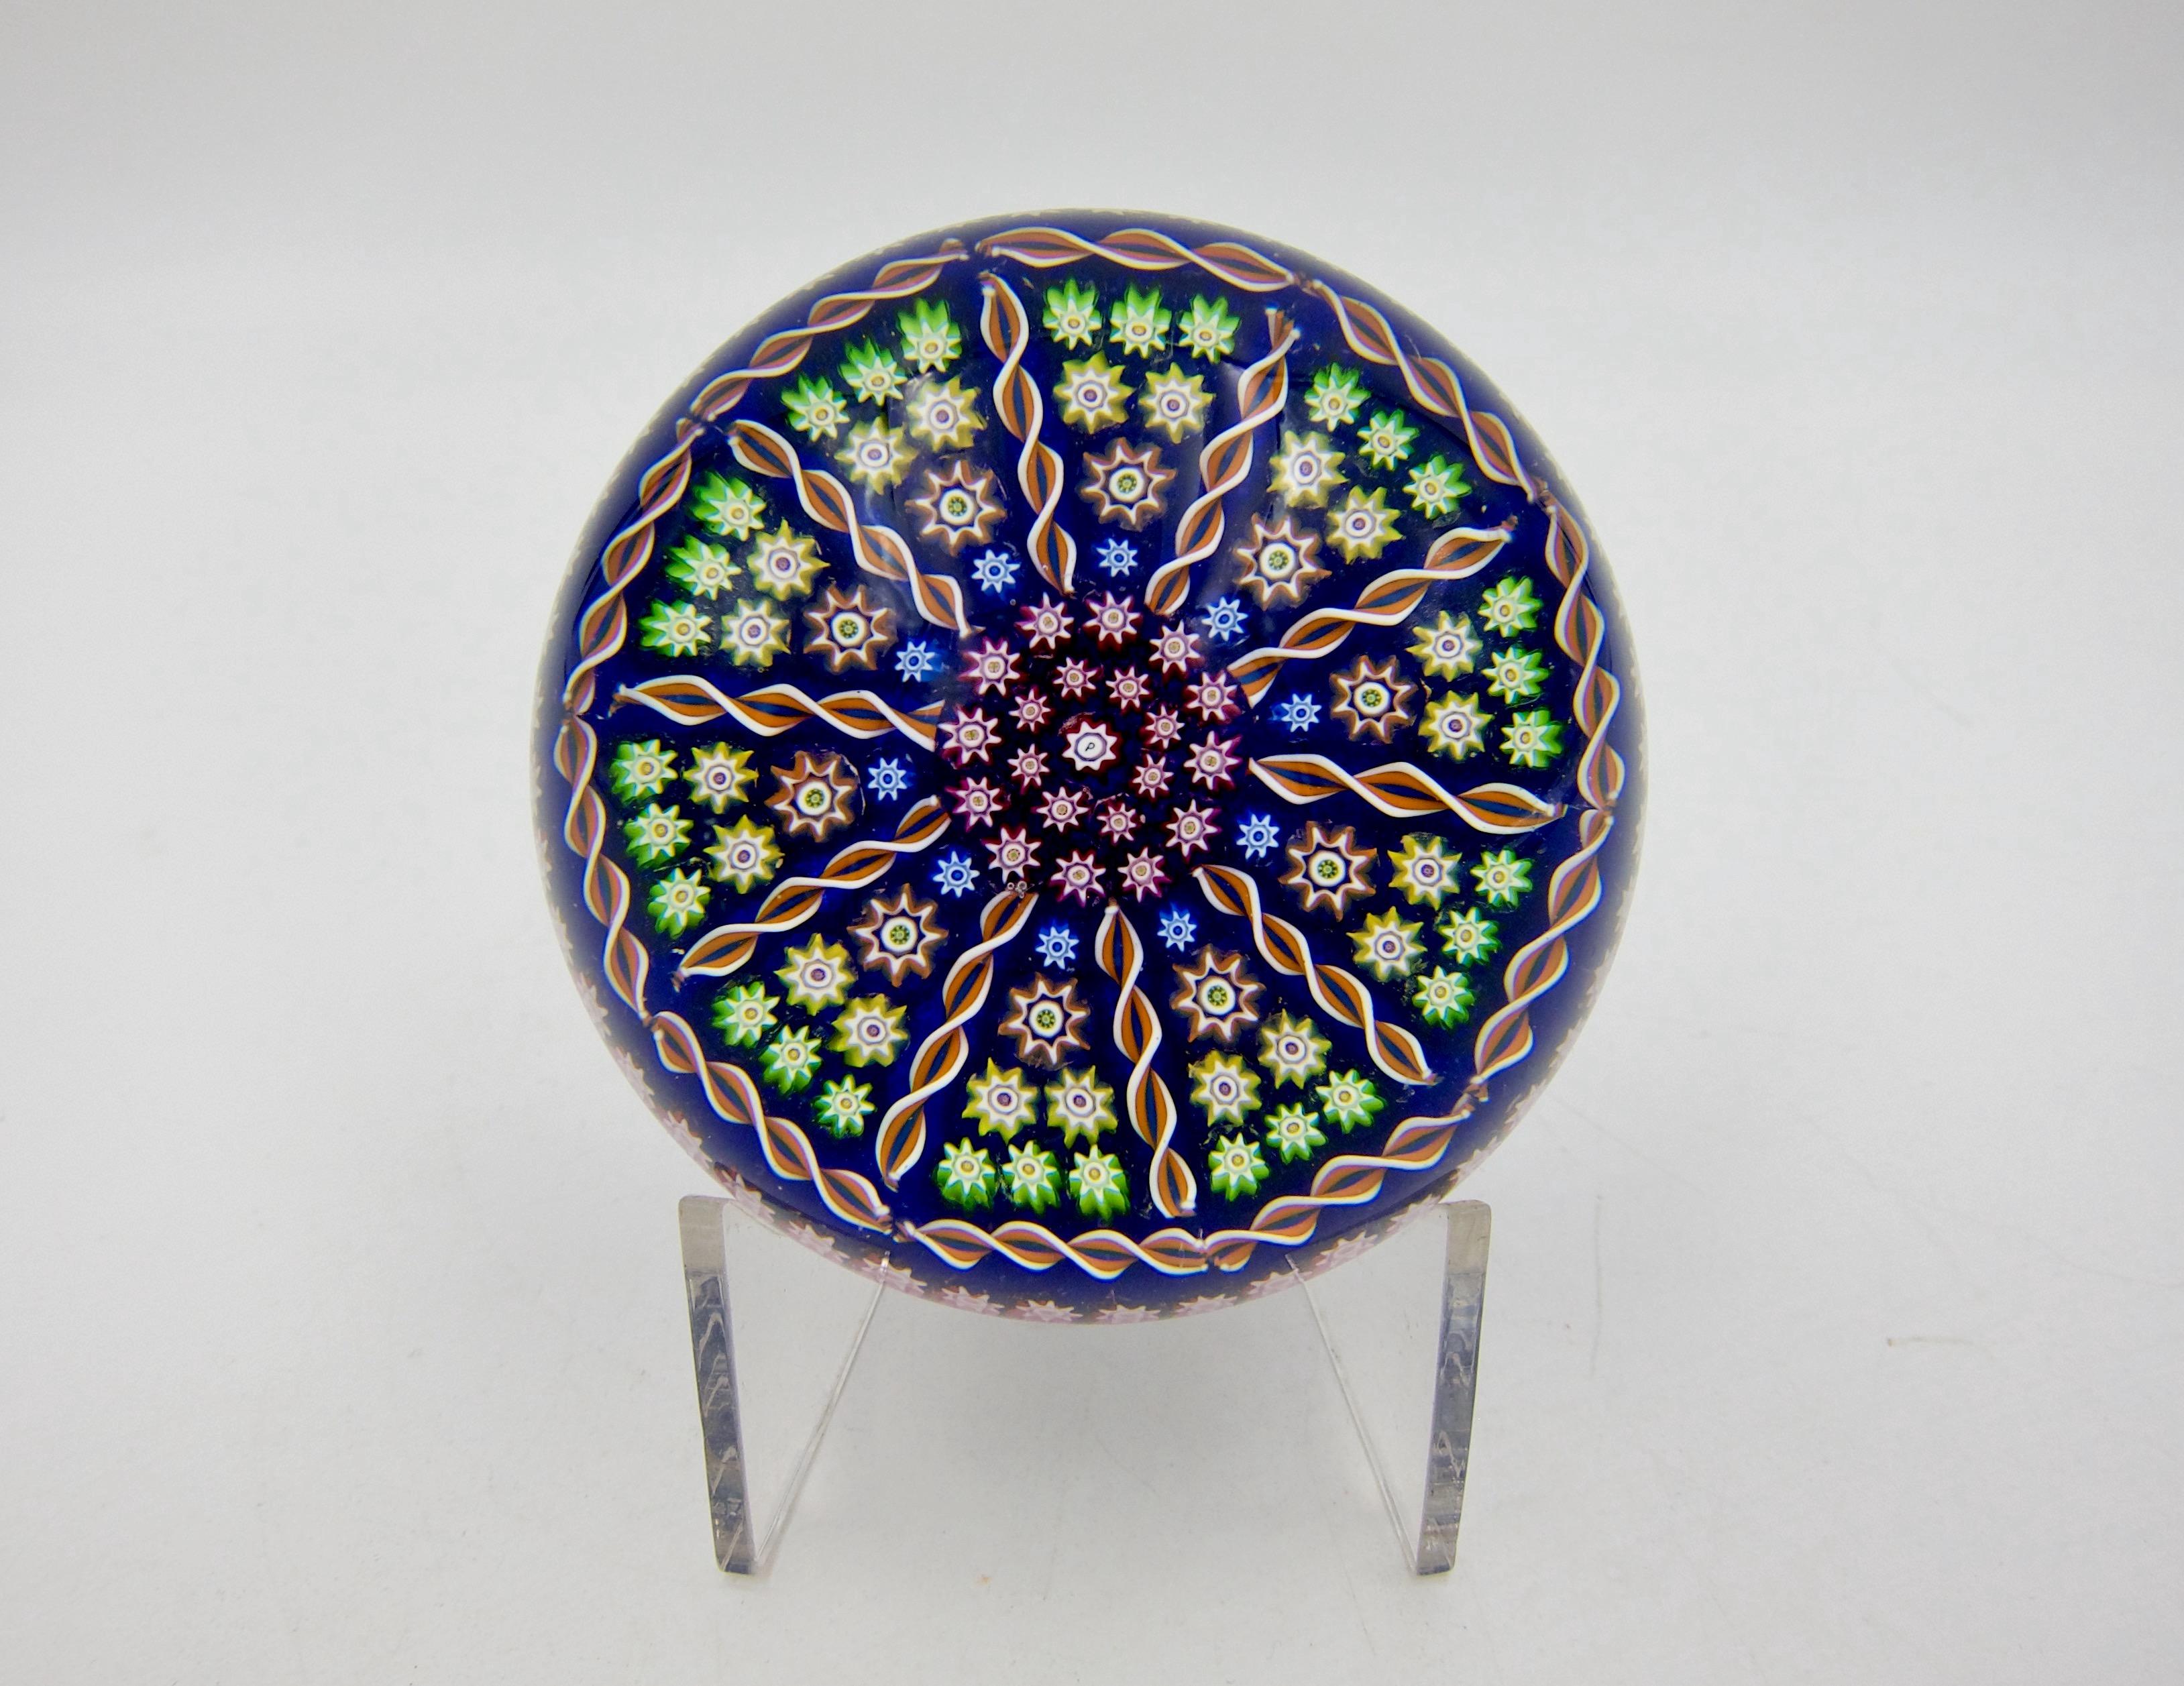 A vintage patterned millefiori and twist art glass paperweight, handcrafted in Crieff, Scotland at Perthshire Paperweights, Ltd., dating 1985-1997.  Designed in a 1-1-2-3 pattern of colorful millefiori canes separated by 10 spokes radiating from two